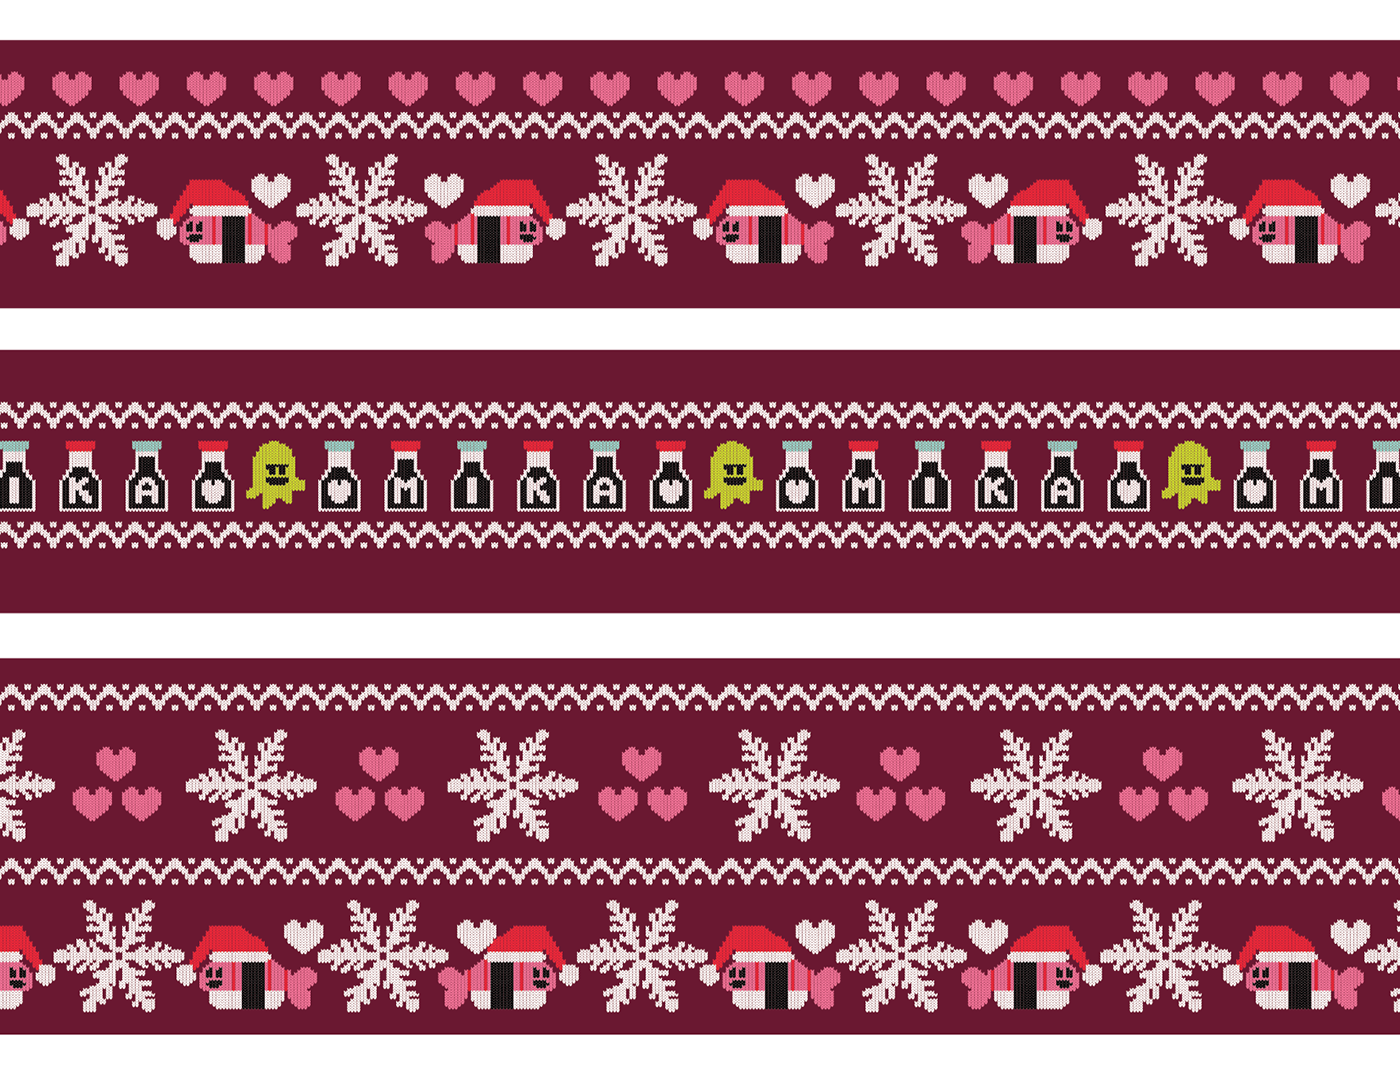 apparel graphics graphic Holiday print vector